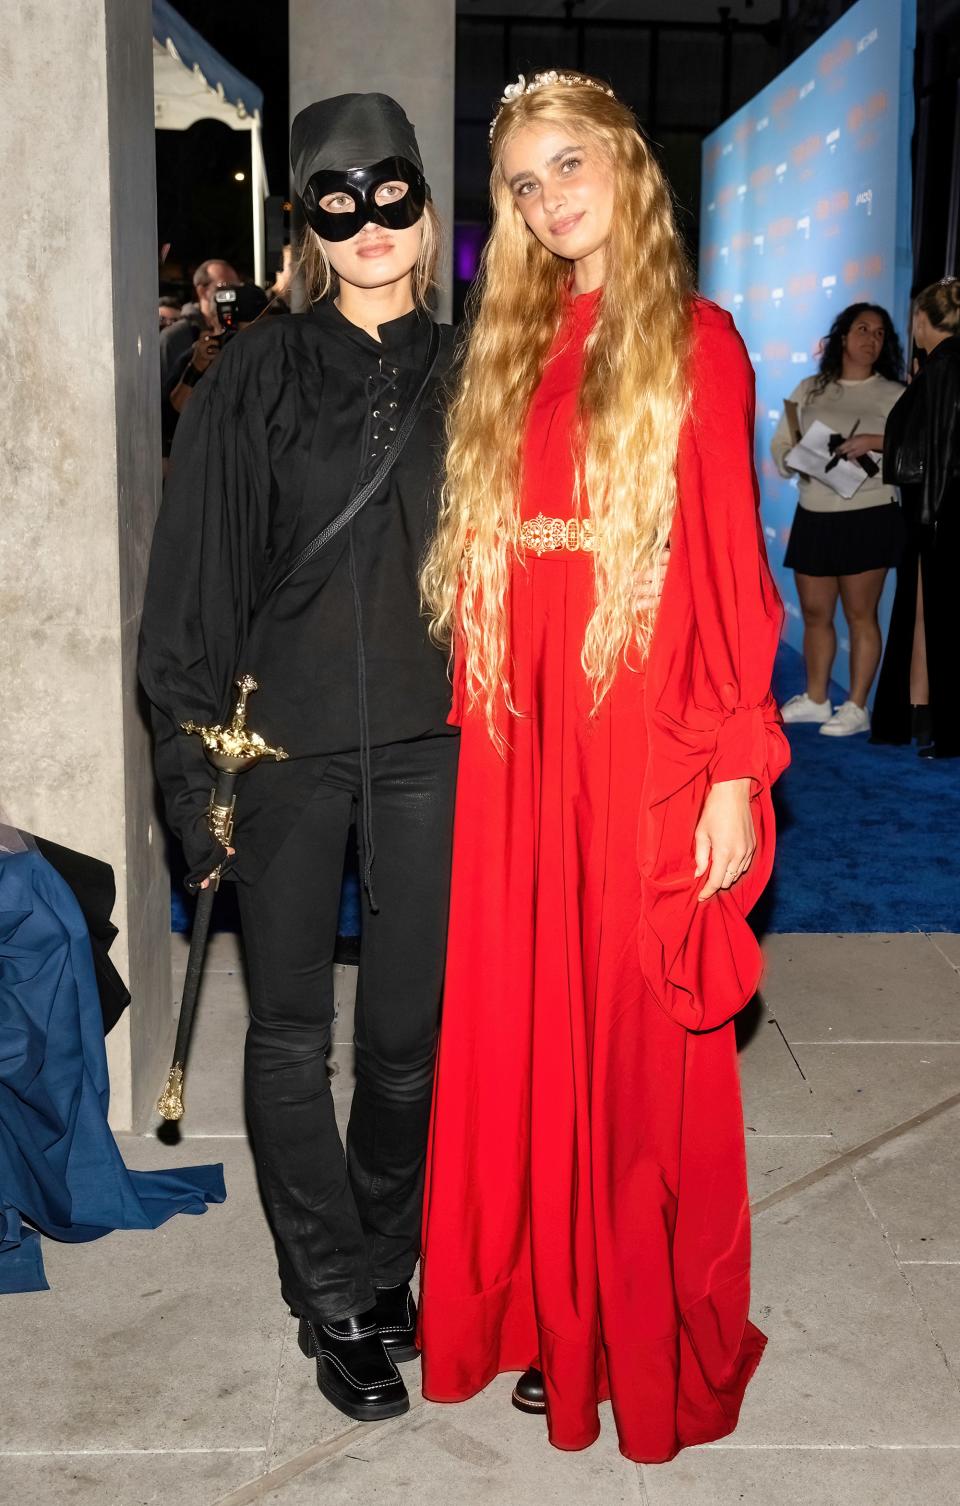 Taylor Marie Hill and Mackinley Hill attend Heidi Klum's 2022 Halloween party.